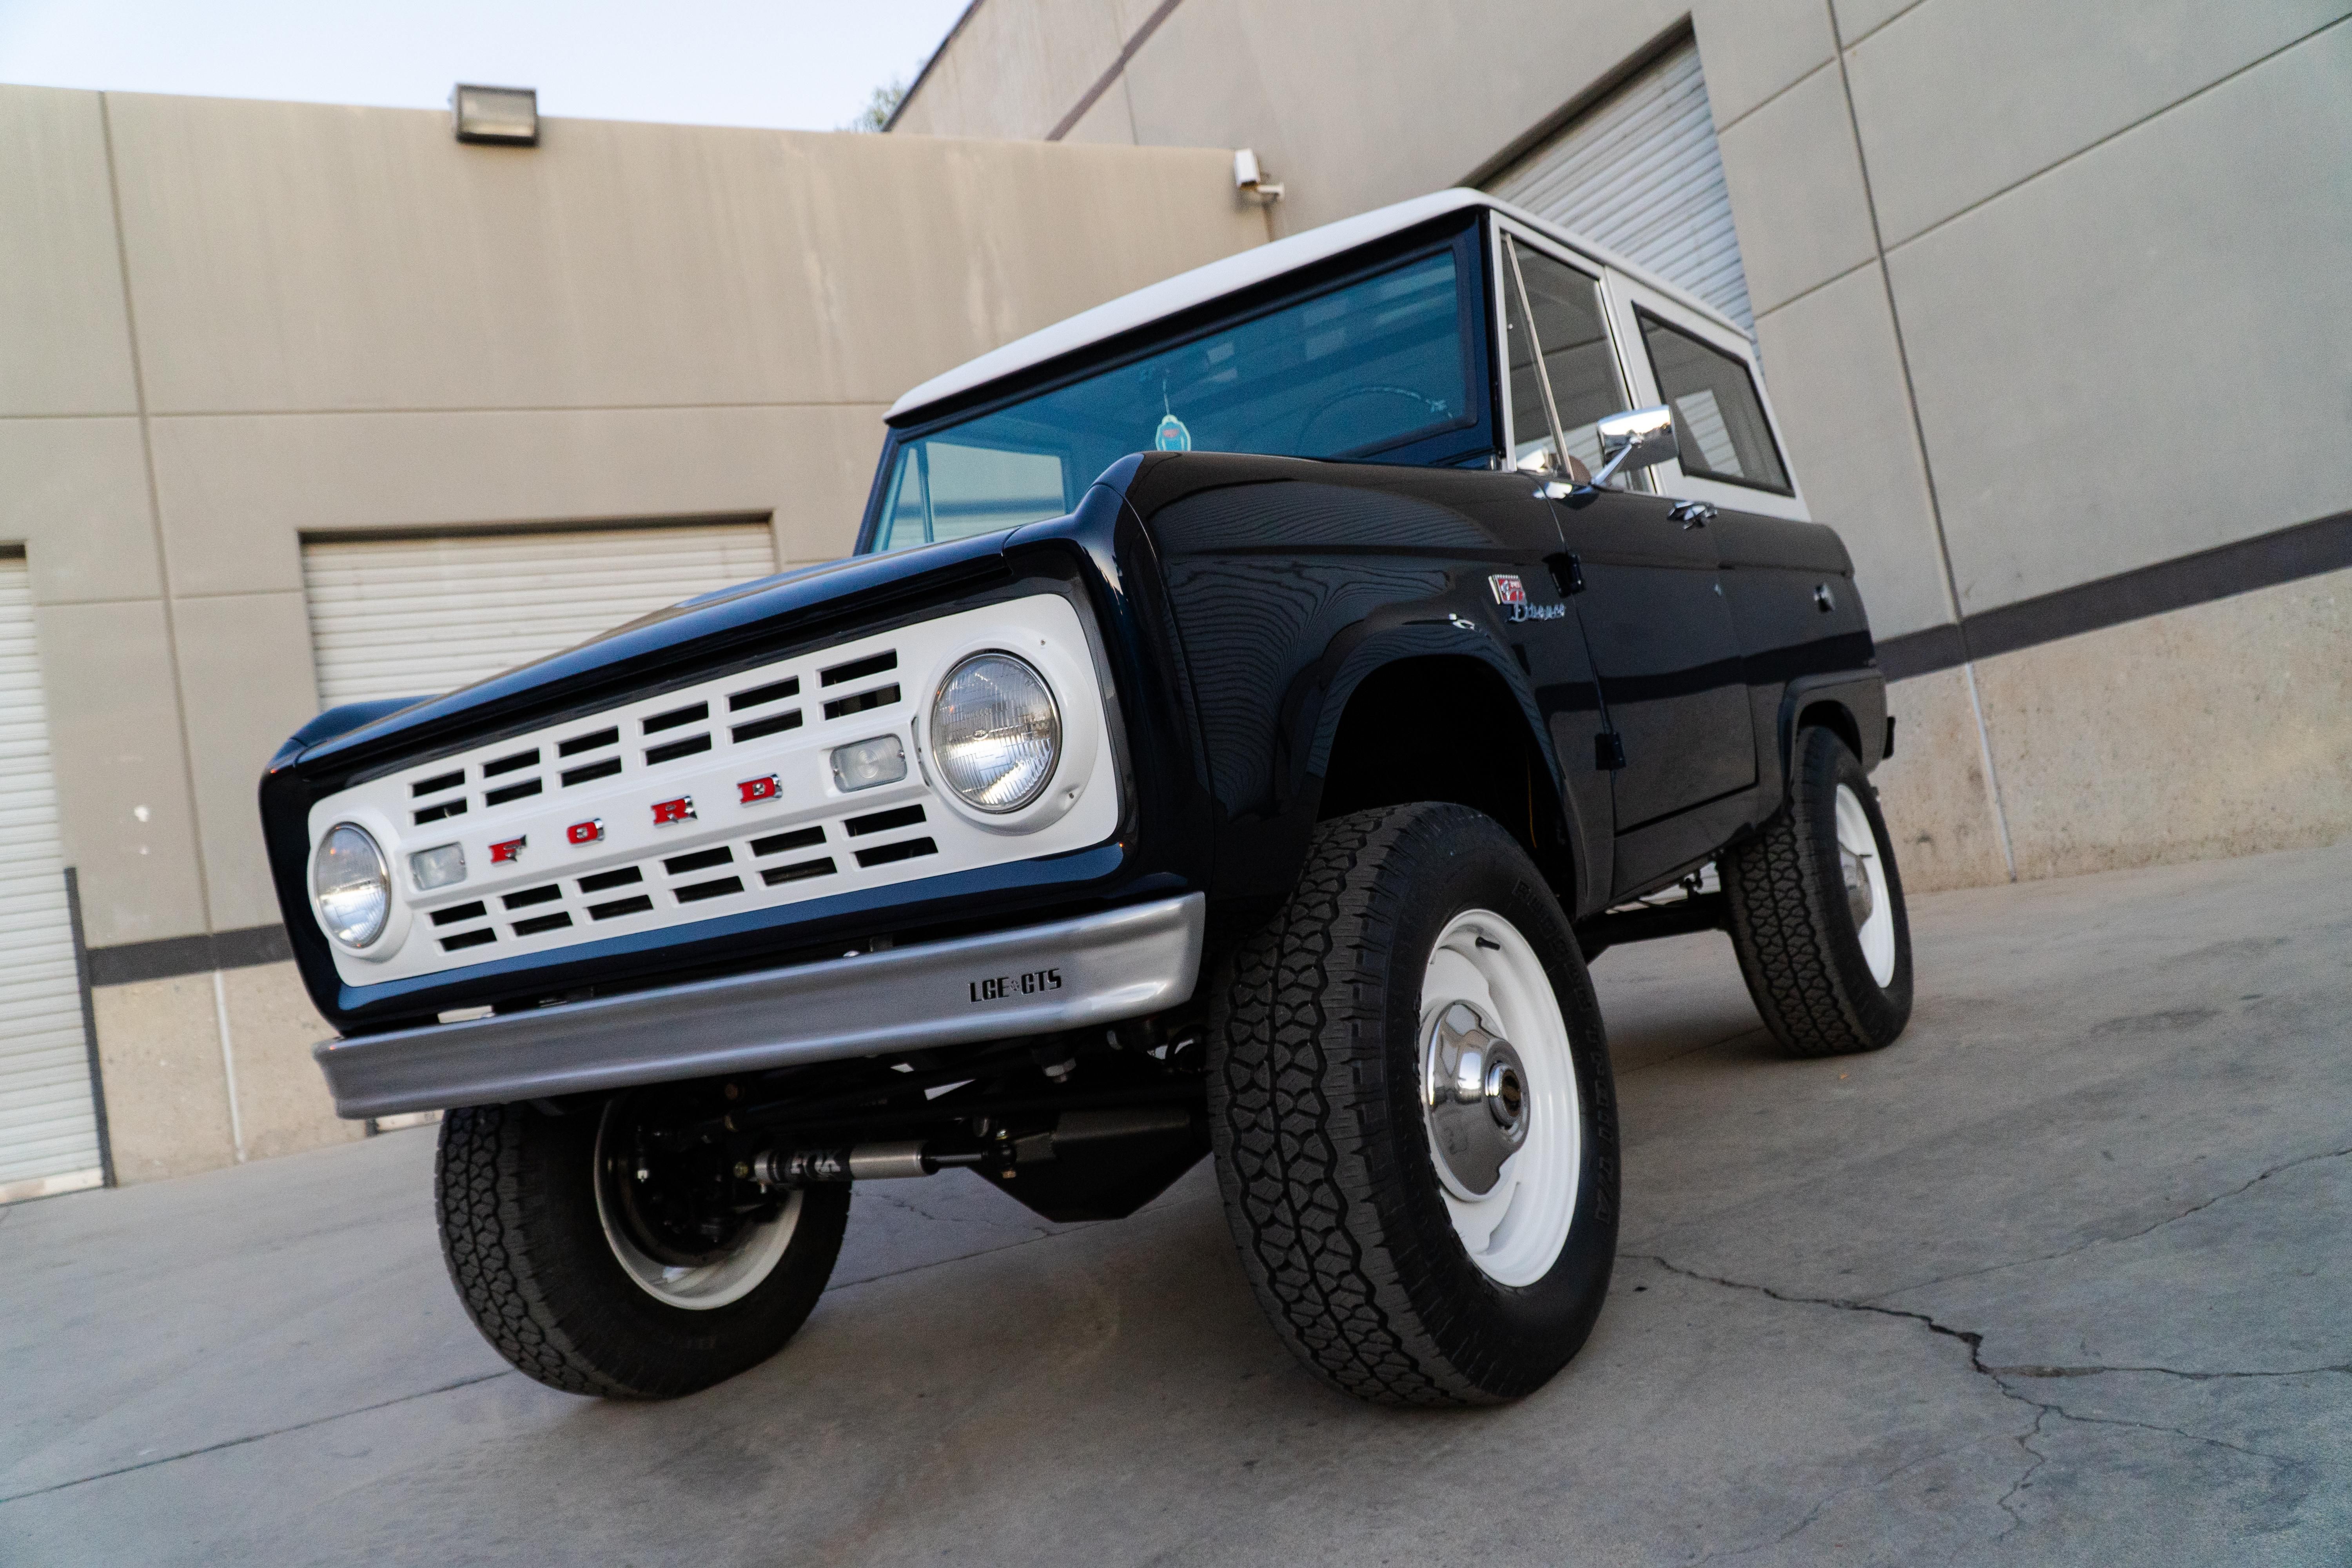 1968 Ford Bronco Wagon by Jay Leno, Ford Performance, LGE-CTS, and SEMA Garage